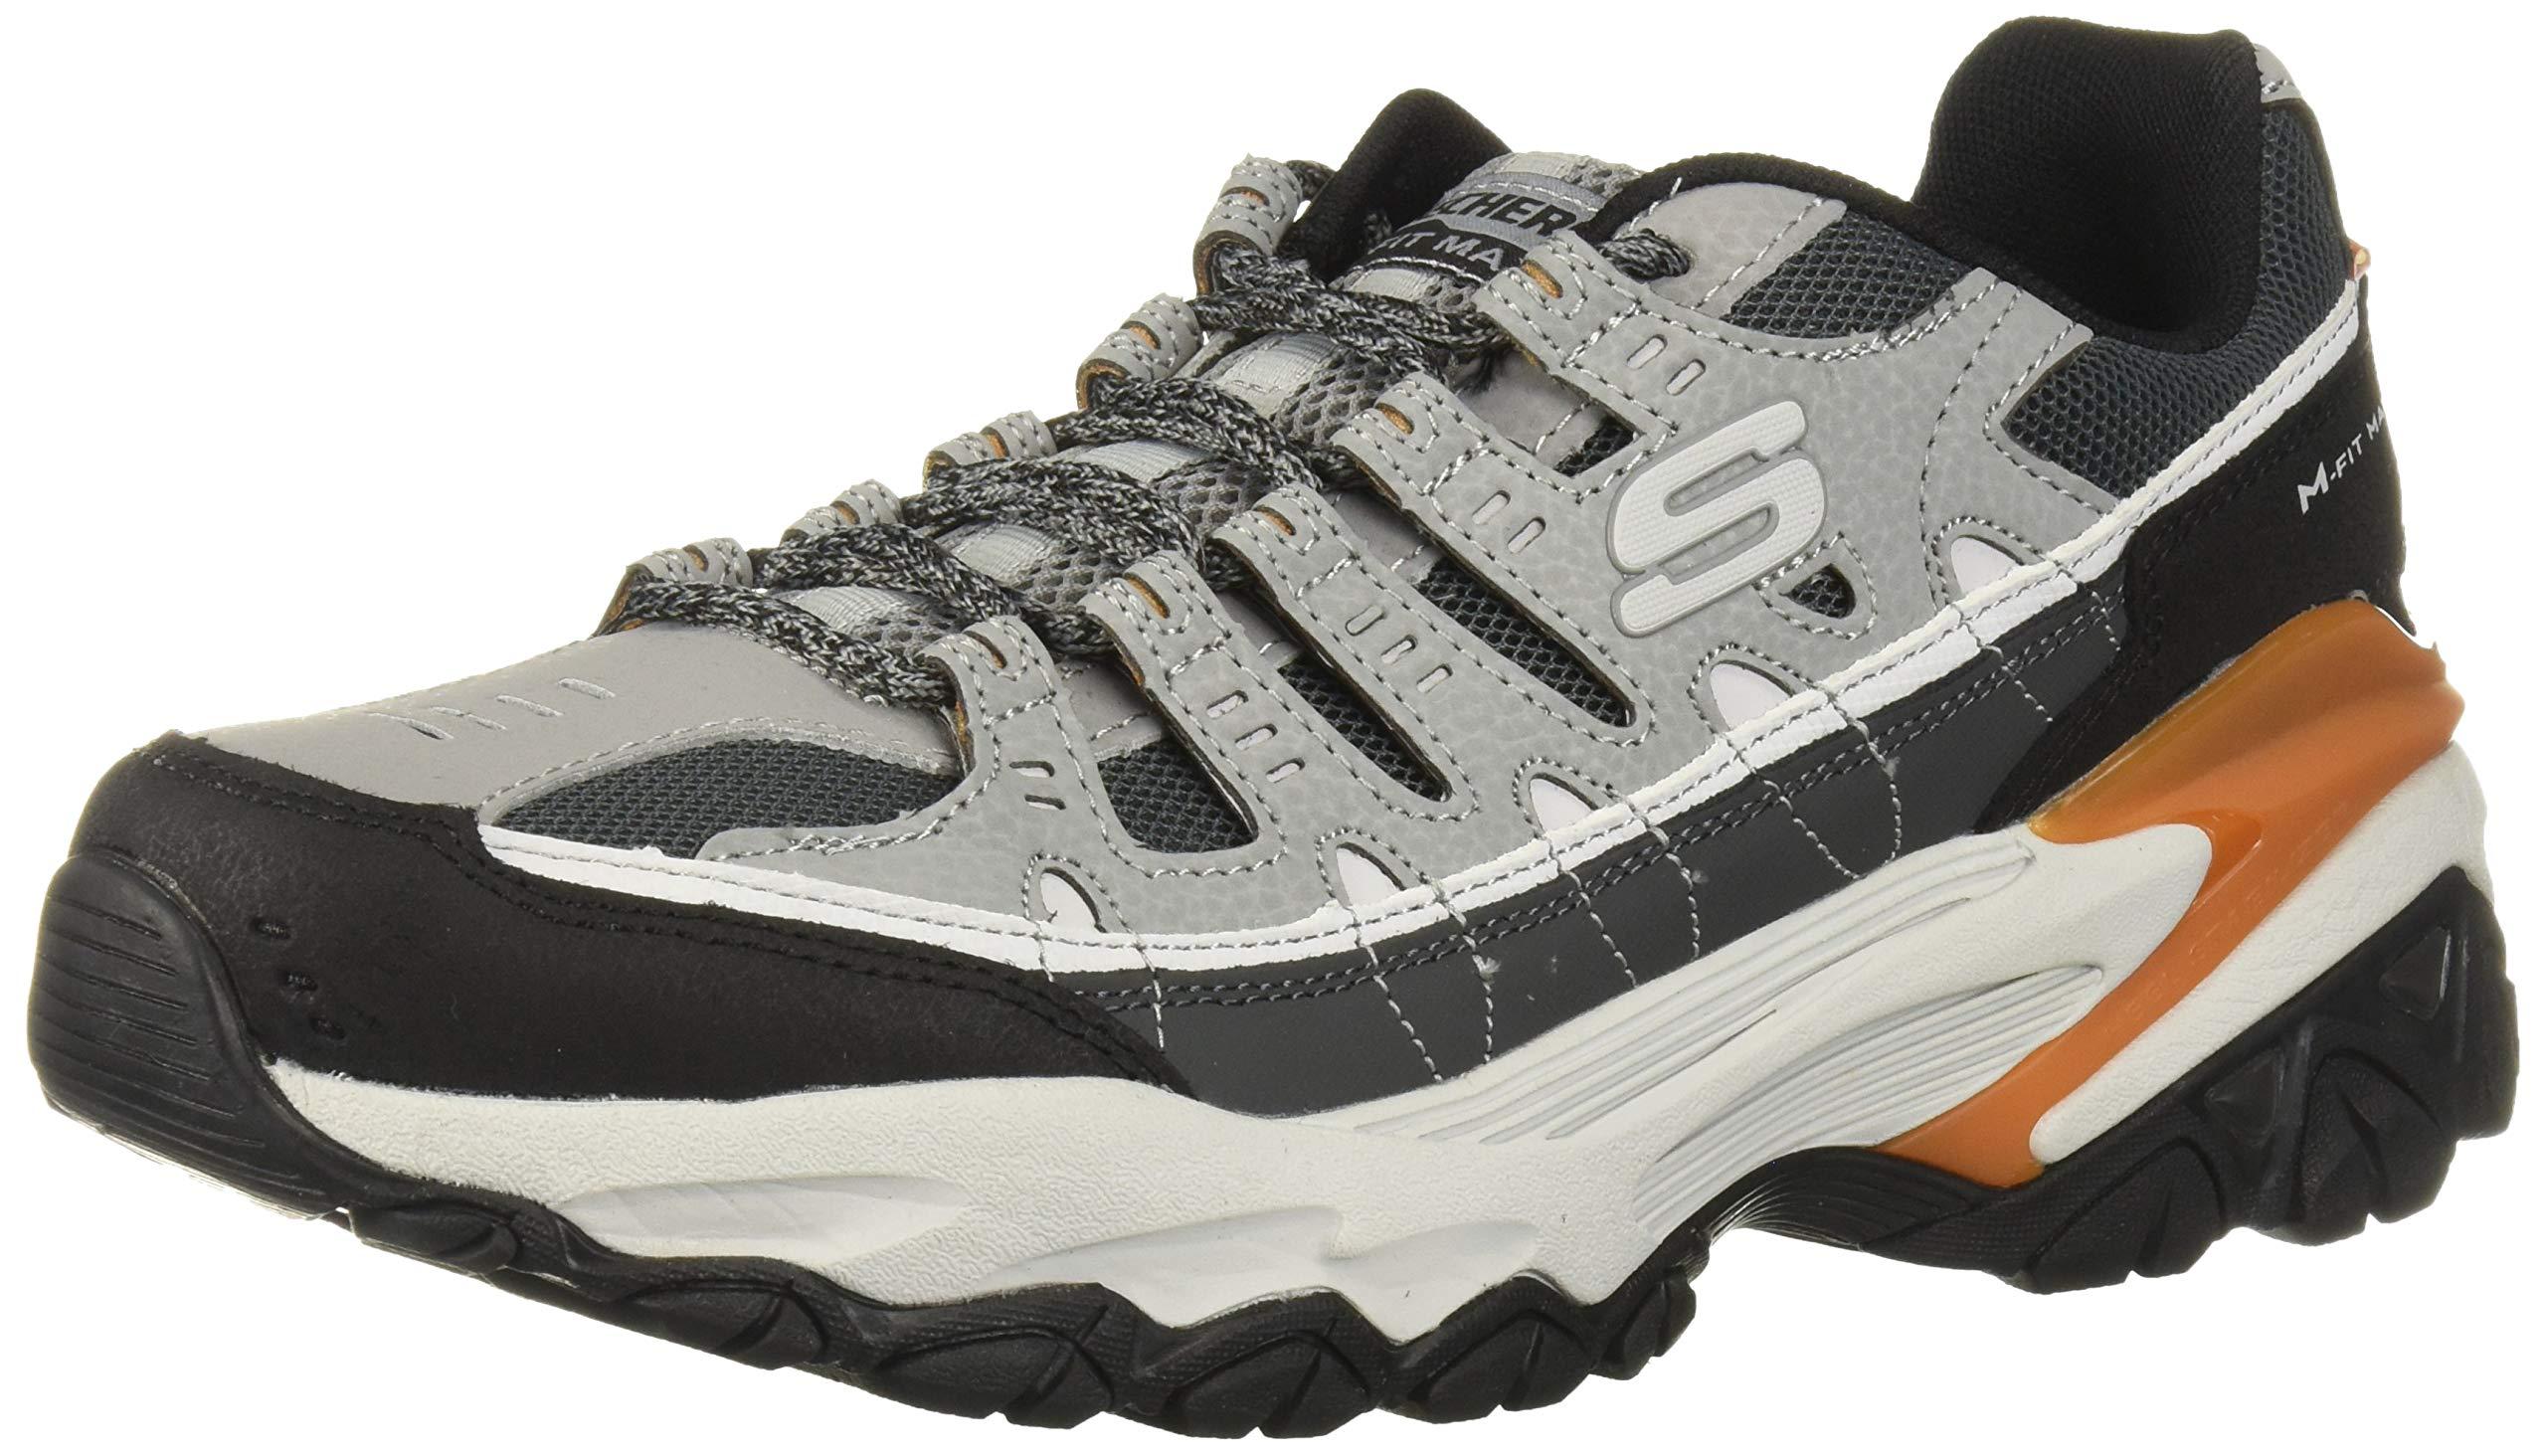 Skechers M. Fit Max Oxford in Charcoal/Gray (Gray) for Men - Lyst